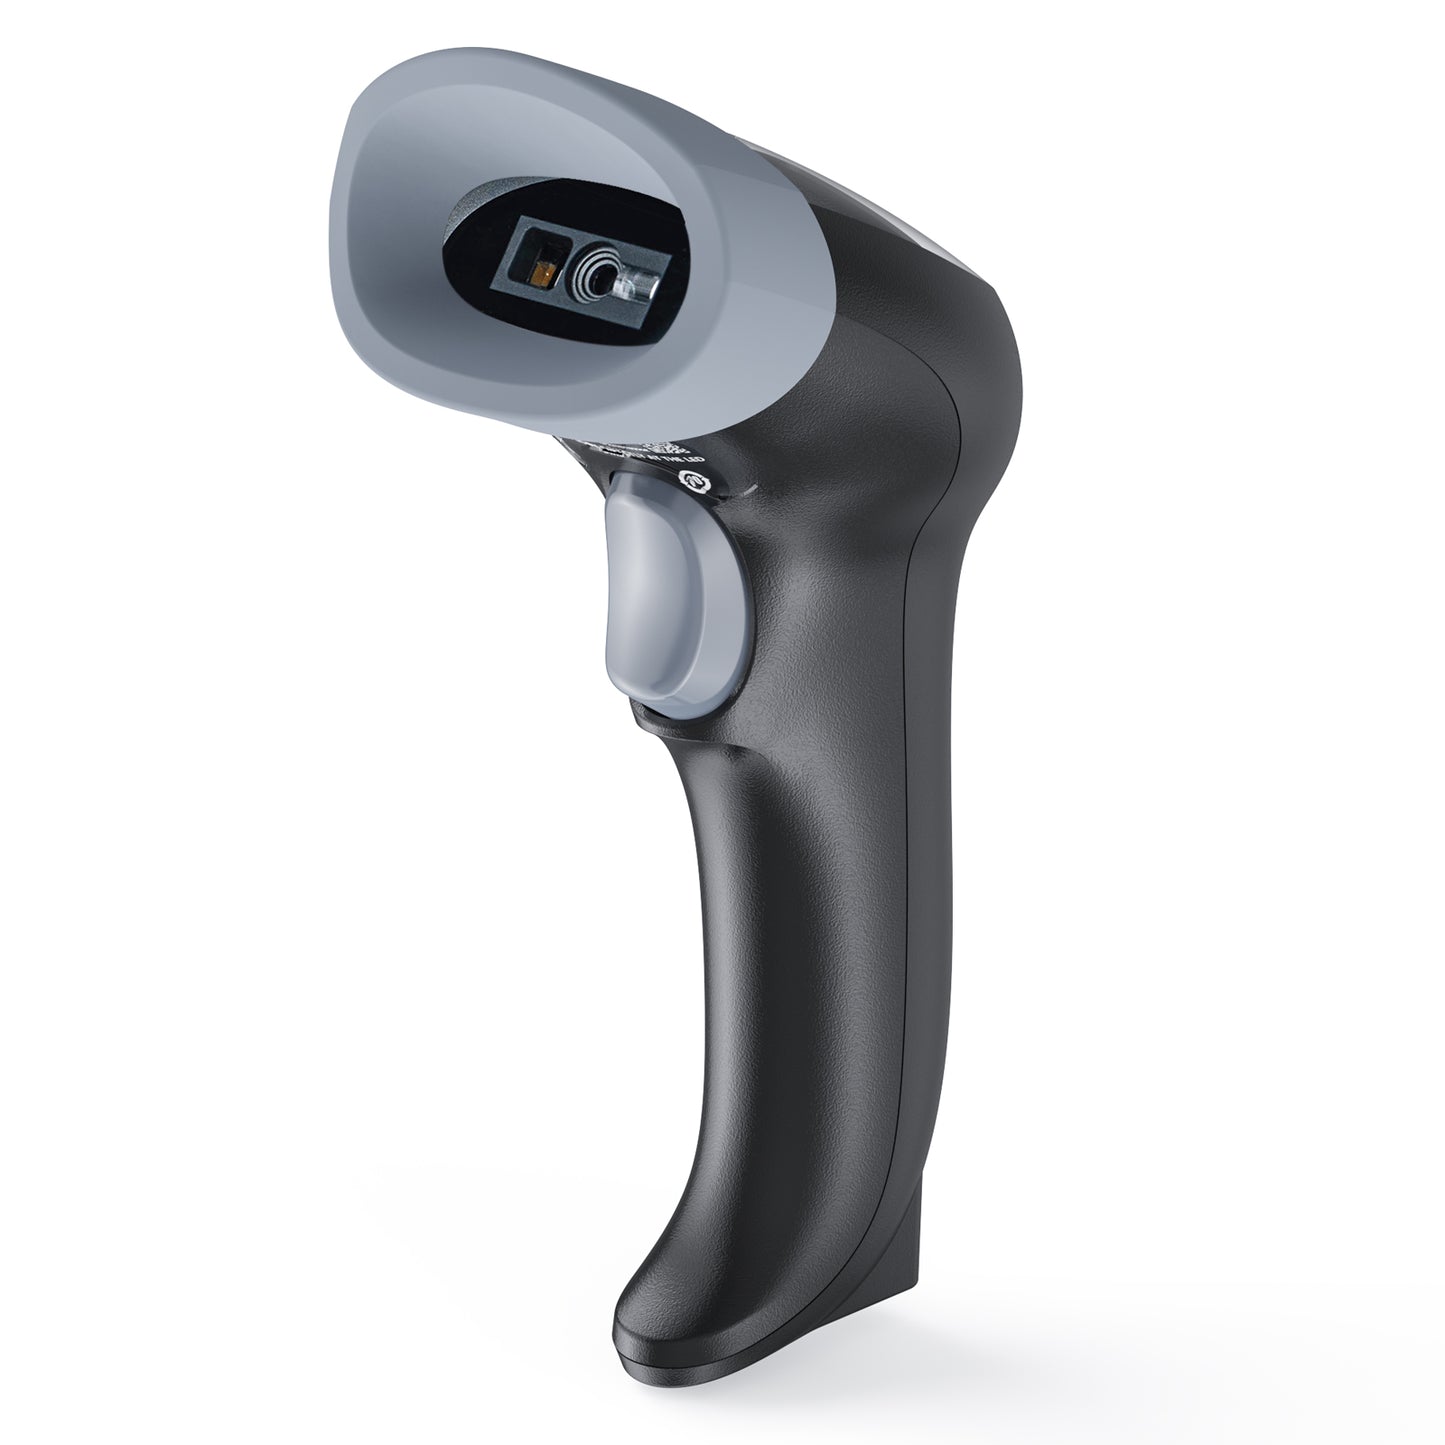 TEEMI TMSL-77 Barcode Scanner with Stand USB Wired Inventory 2D 1D QR Code Scanners for Computer POS Support Handsfree Mode, Handheld CMOS Imager Bar Code Reader for Retail Hospitality Office